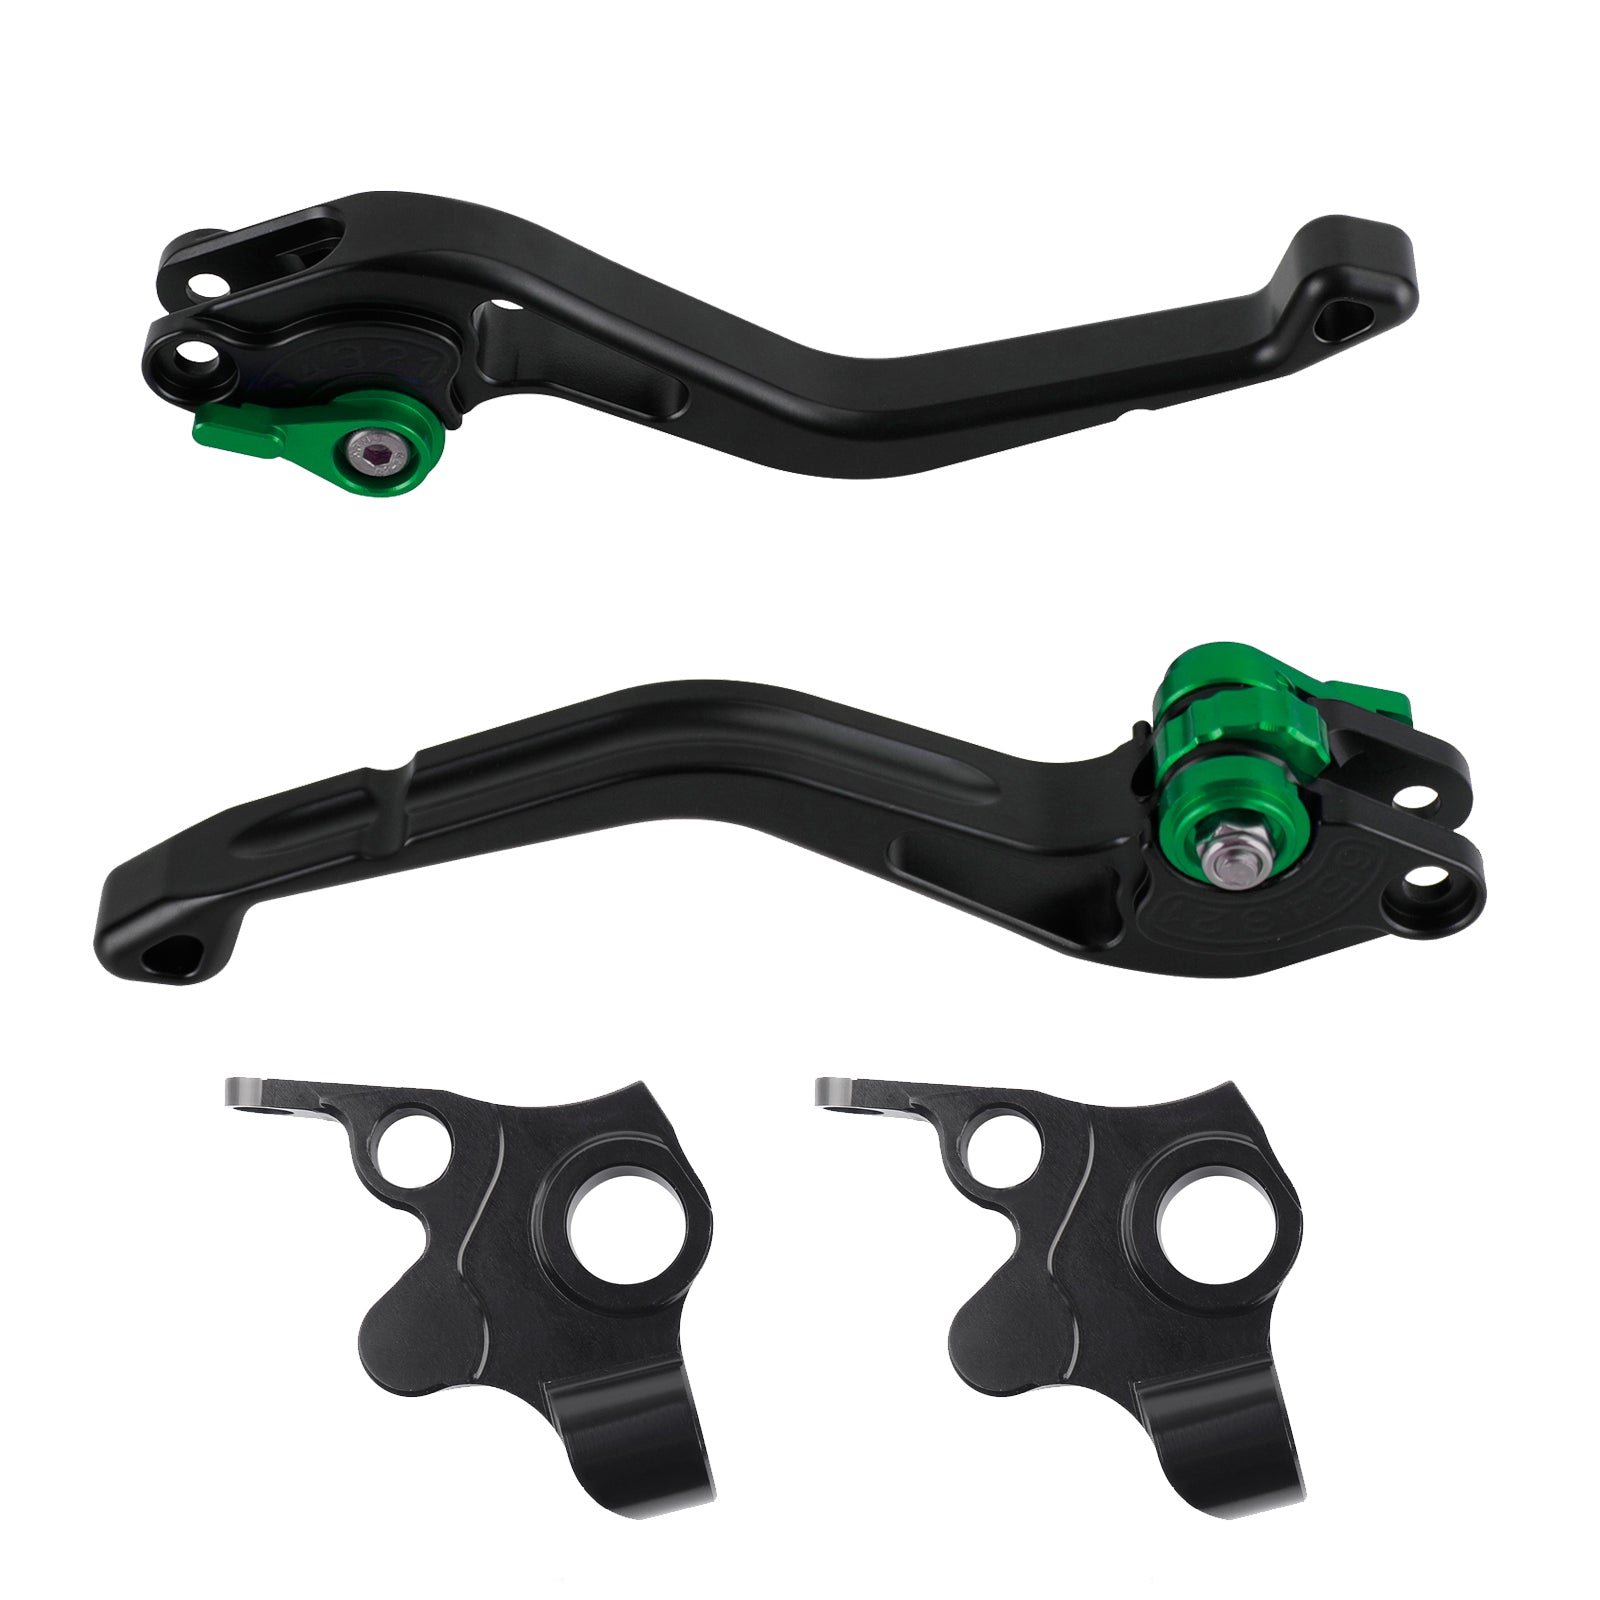 NEW Short Clutch Brake Lever fit for KYMCO 2017-2018 AK550